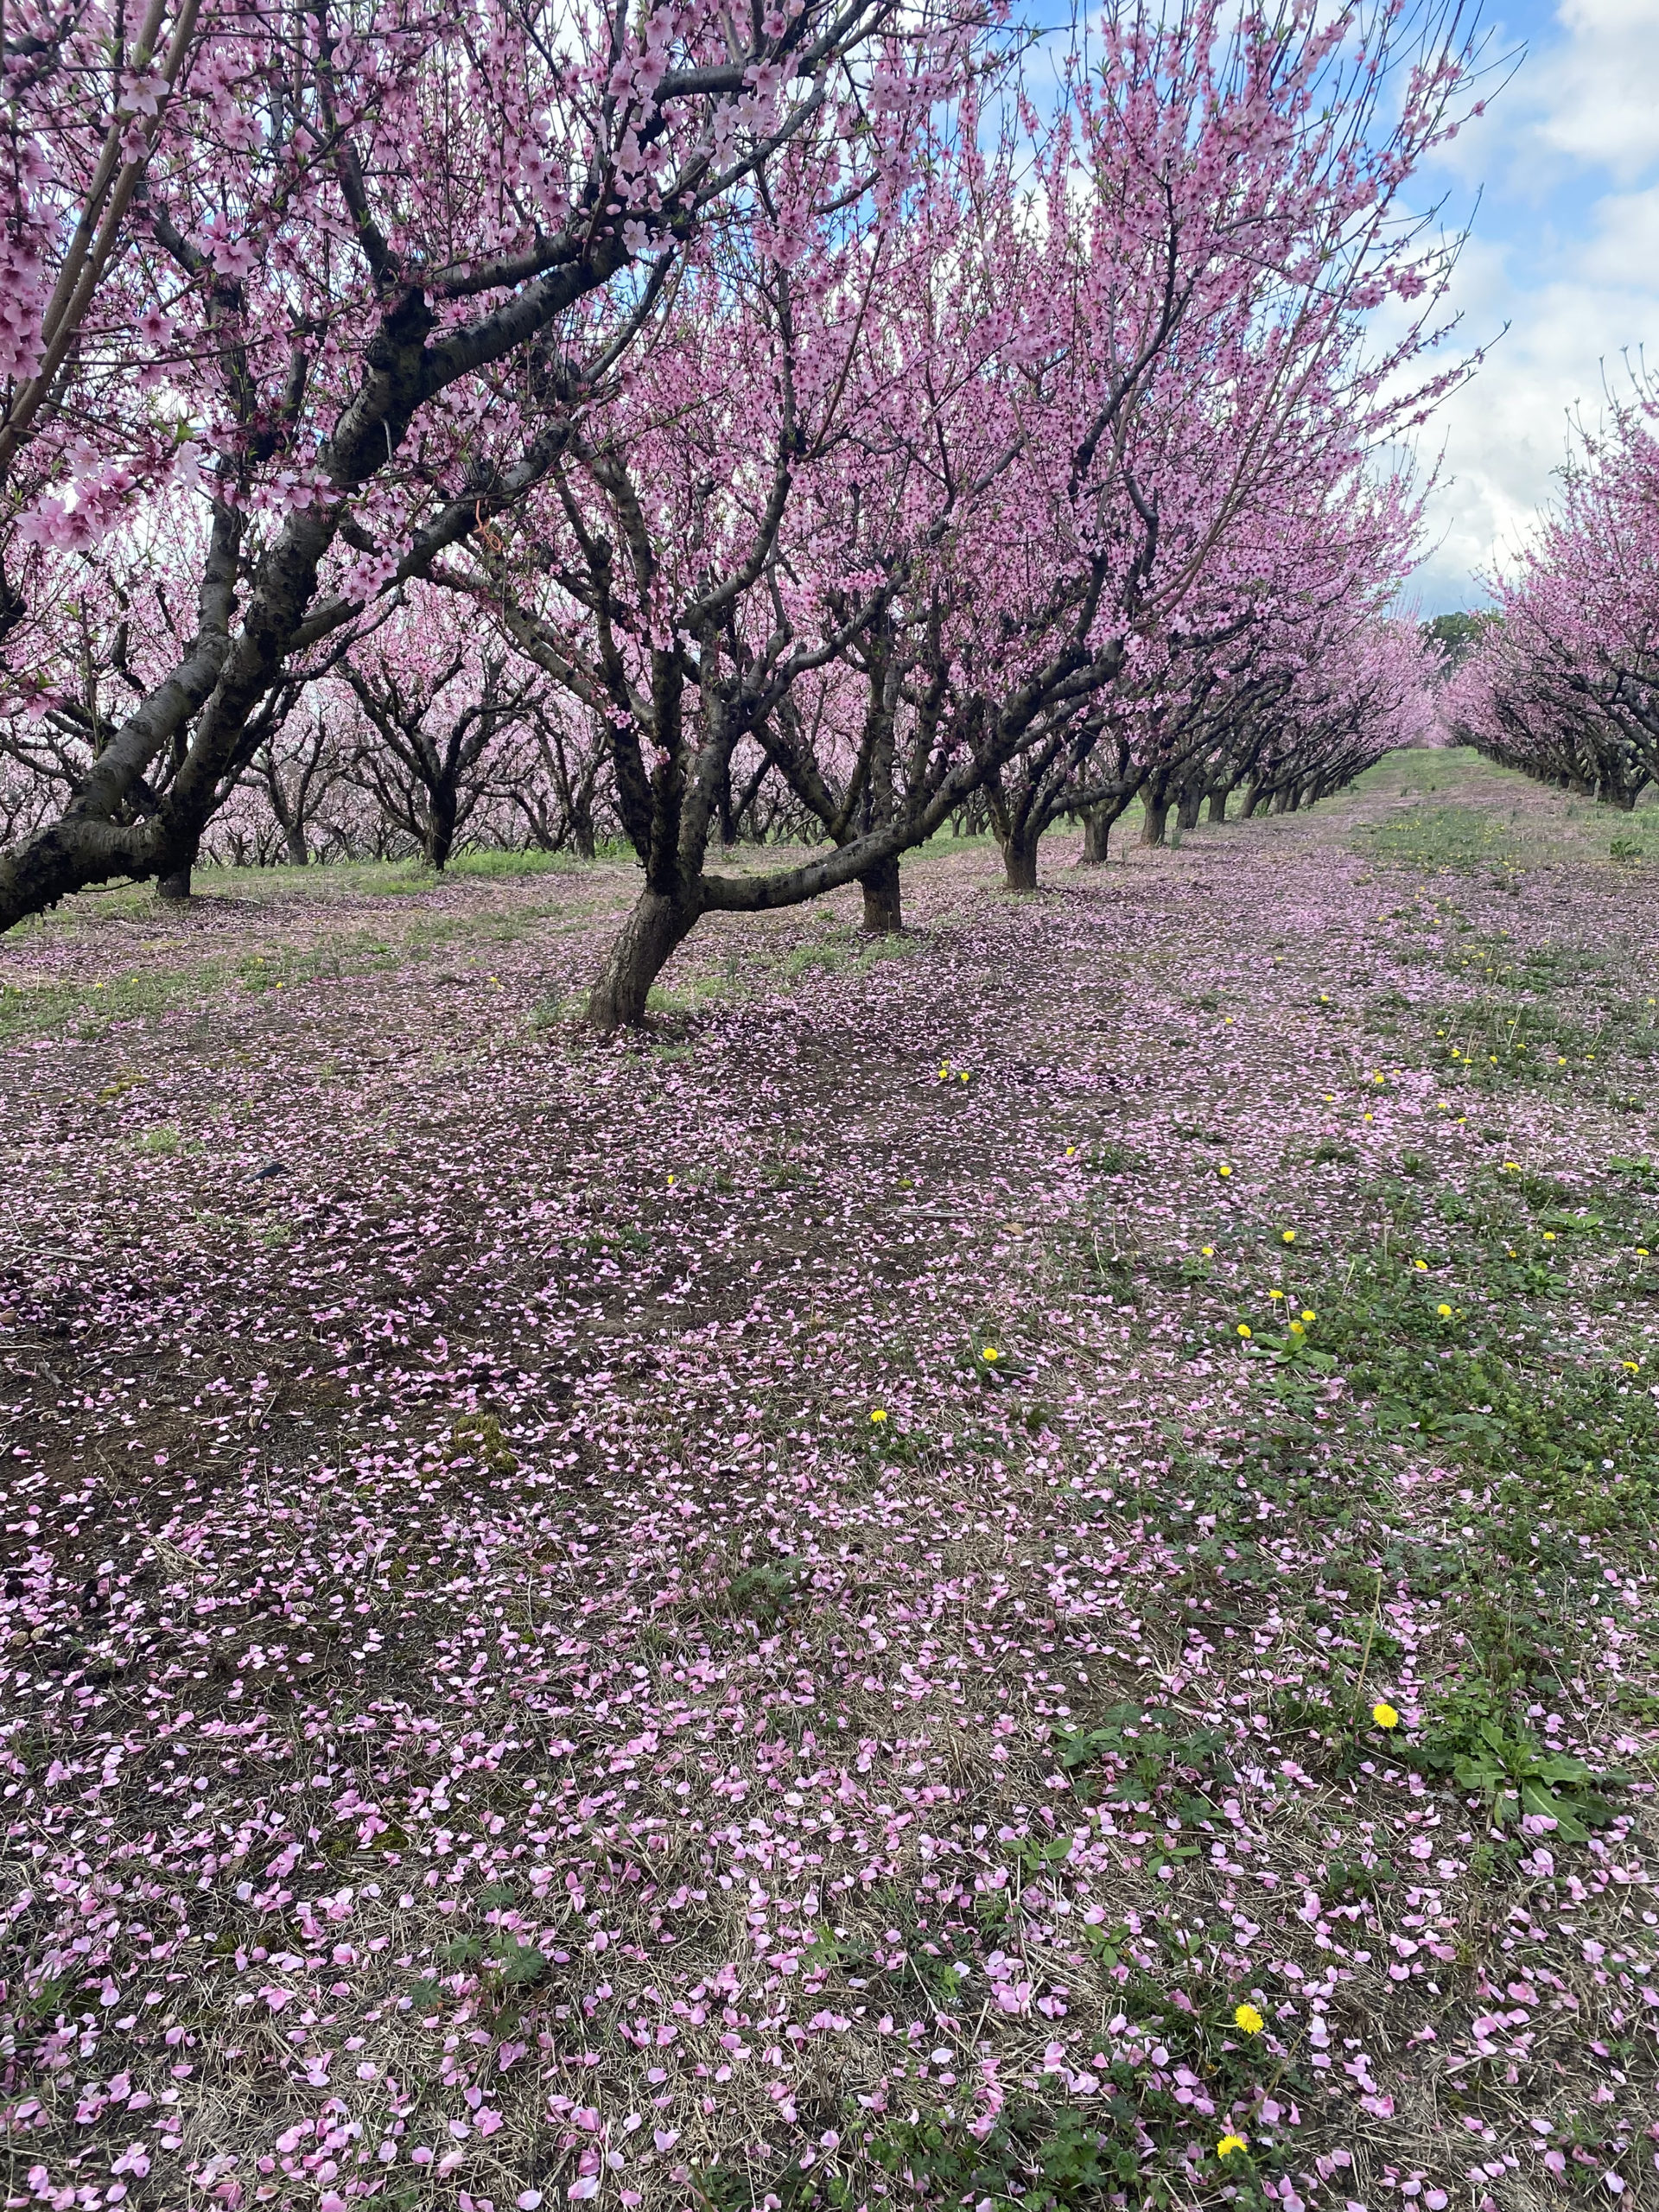 Featured image for “Alabama Peach Trees in Better Position to Withstand Potential Freeze Event”